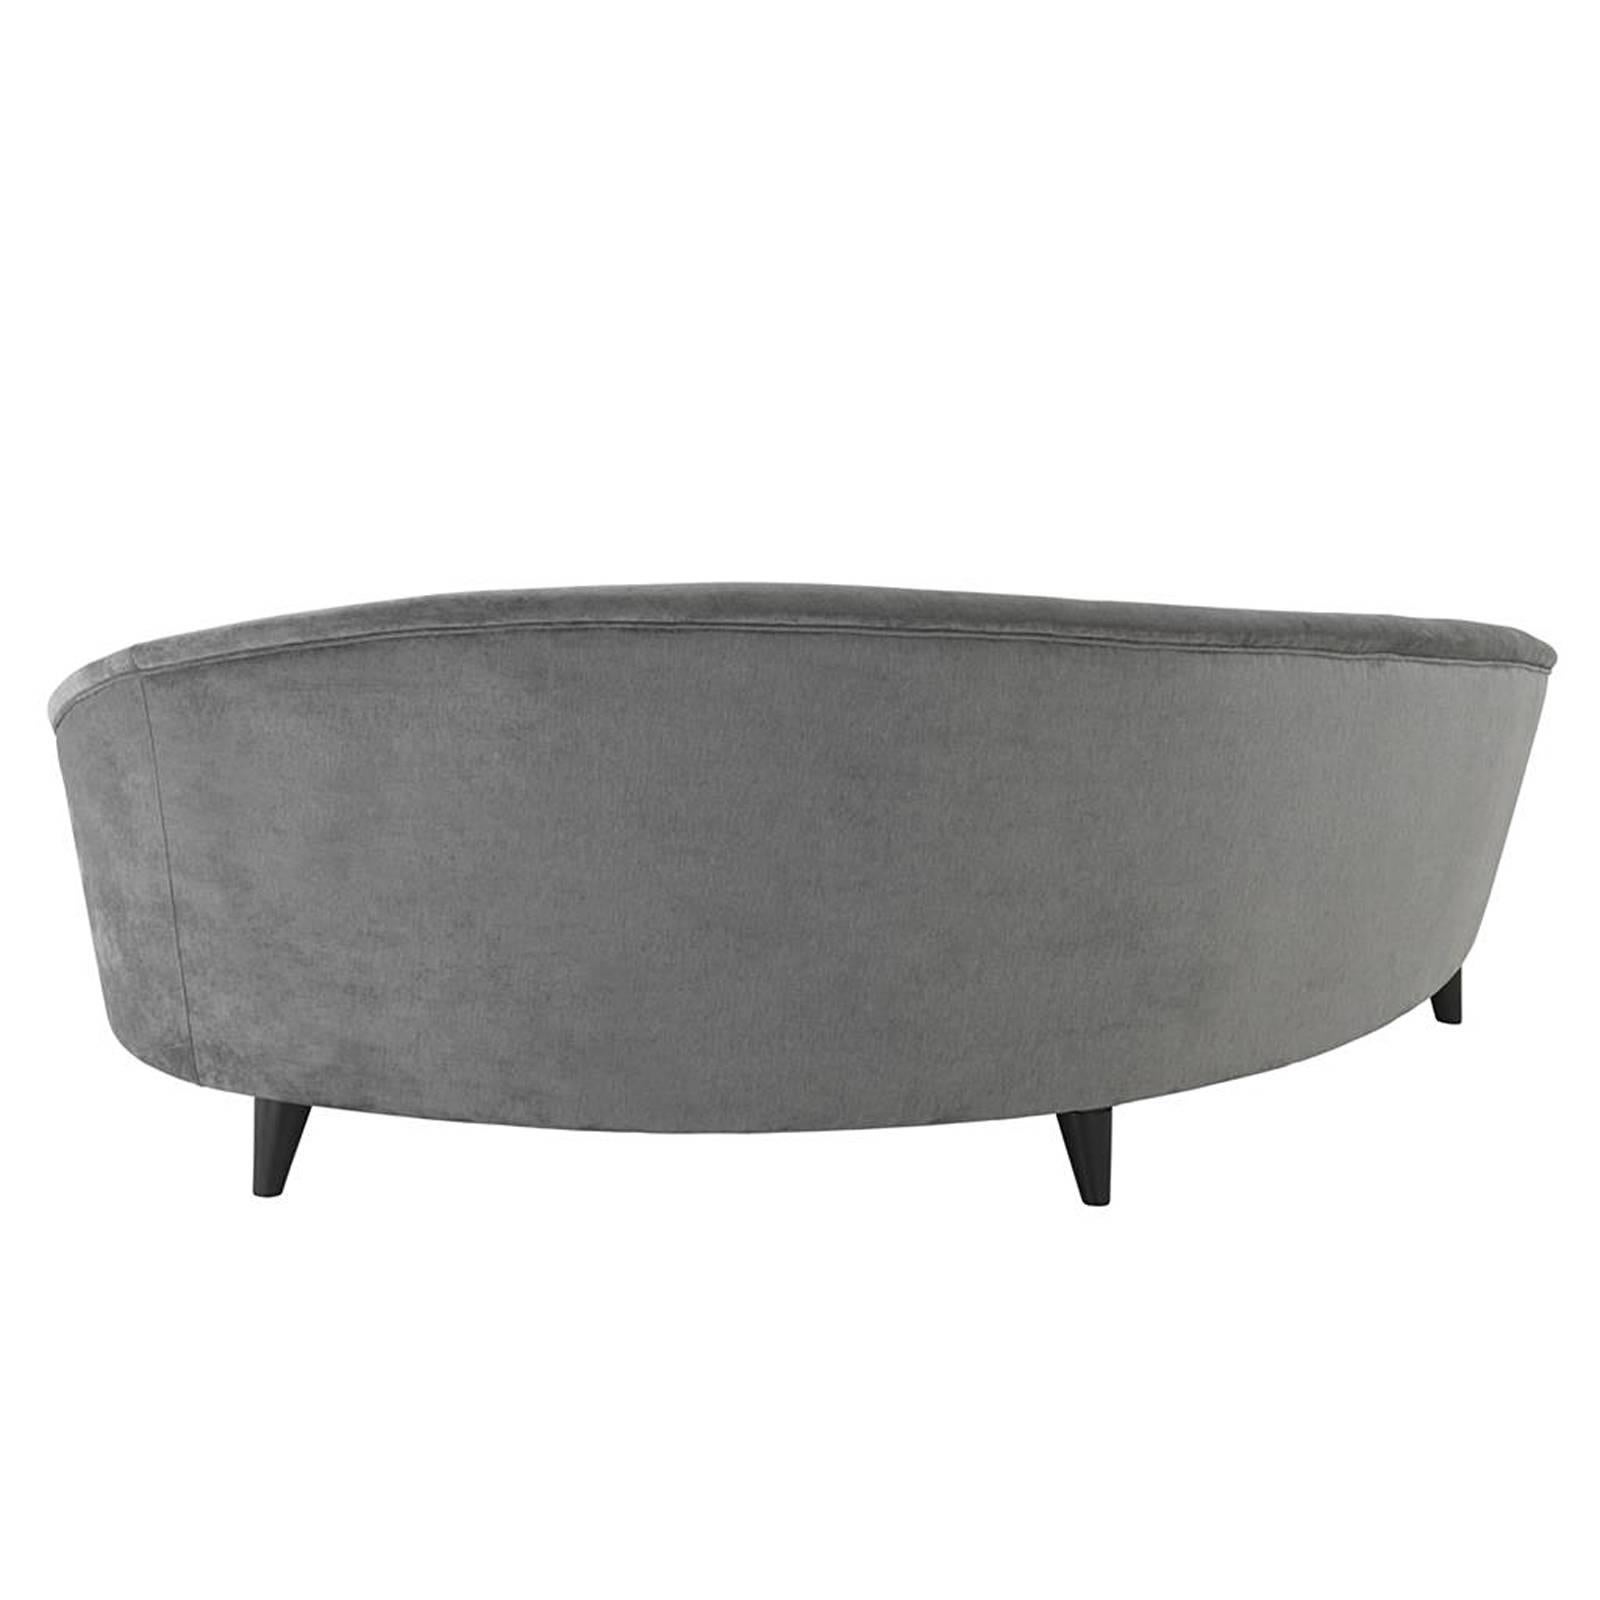 Chinese Cocoon Wood Sofa in Grey Velvet